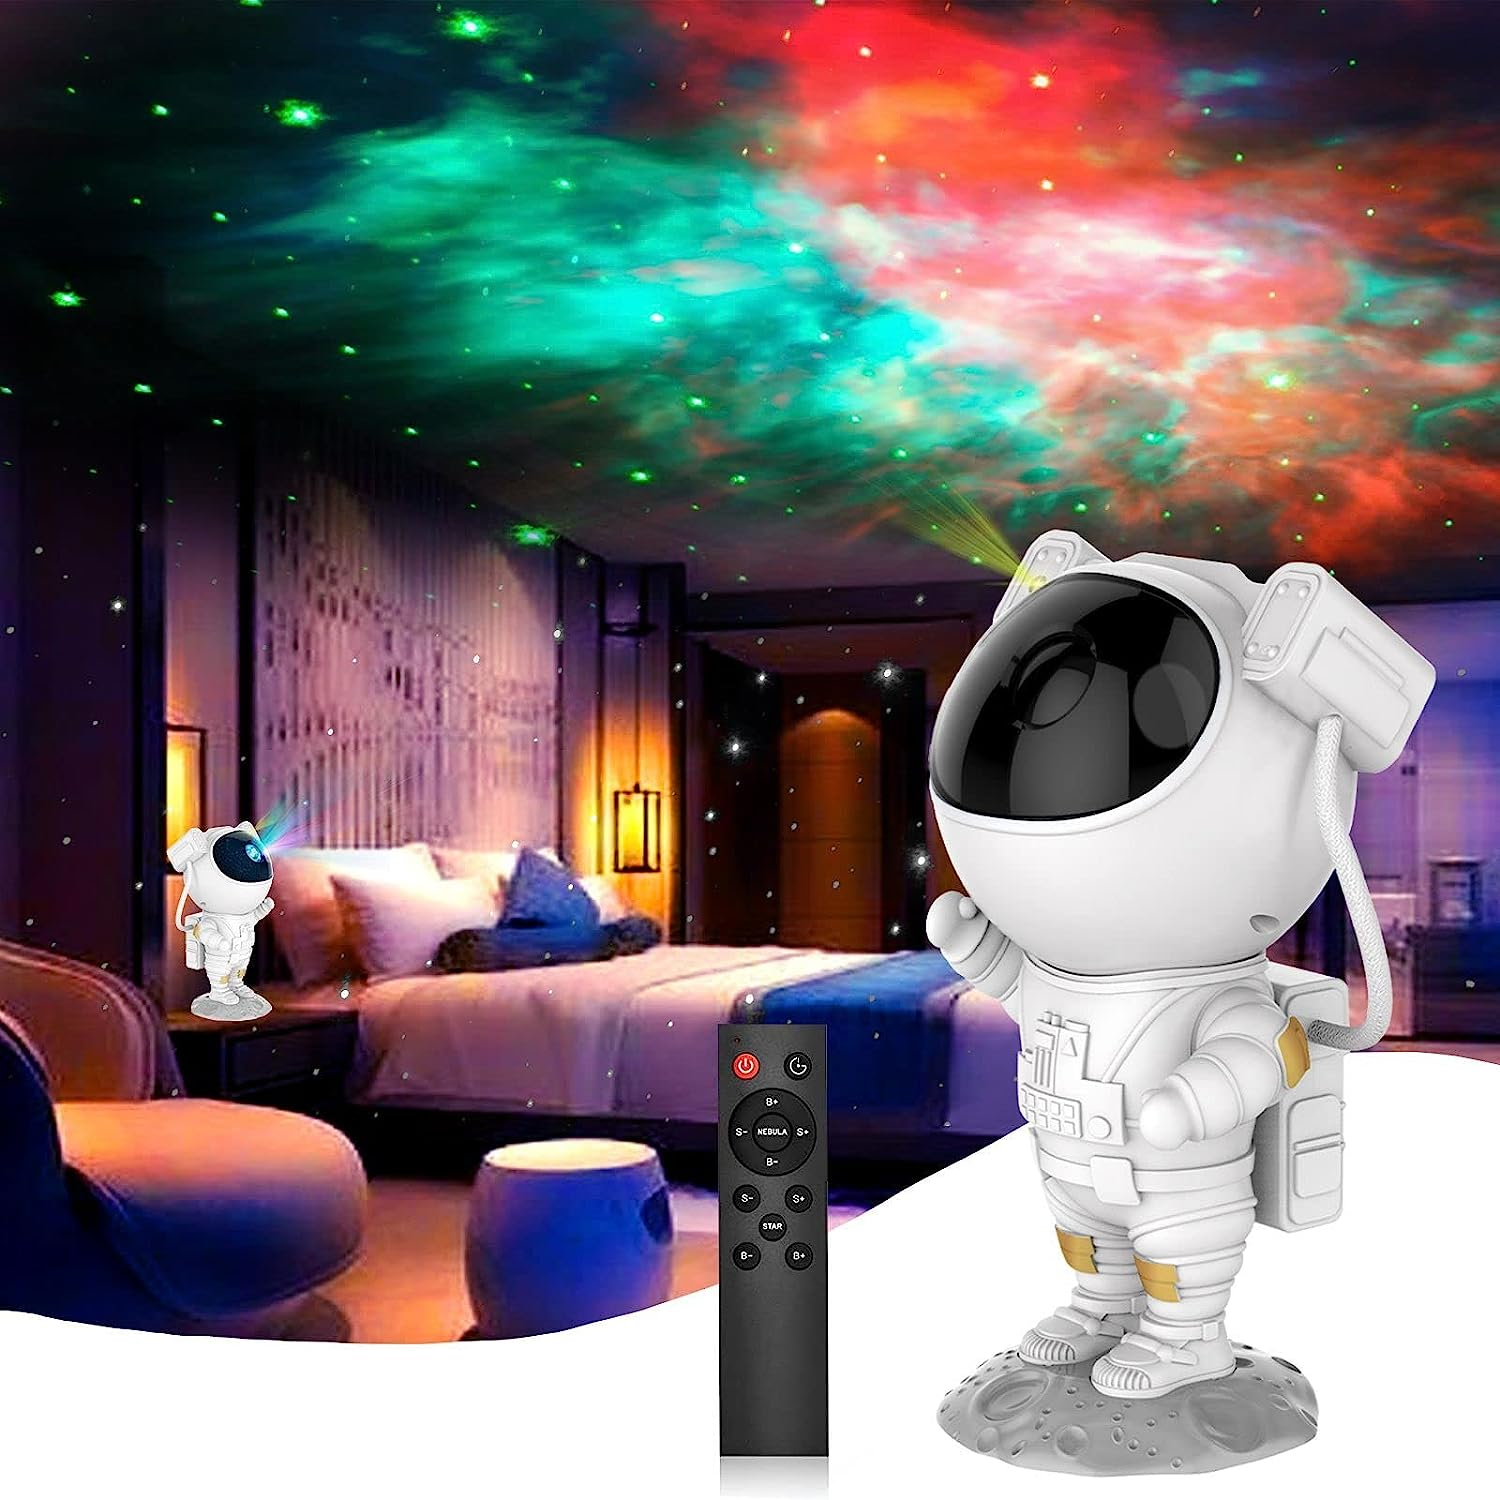 Star Projector Night Light Astronaut LED Projection Lamp with Remote  Control 360 Magnetic Head Rotation Galaxy Space Nebula Projector, Best Gift  For Kids Bedroom, Christmas, Home Party, Valantine Day